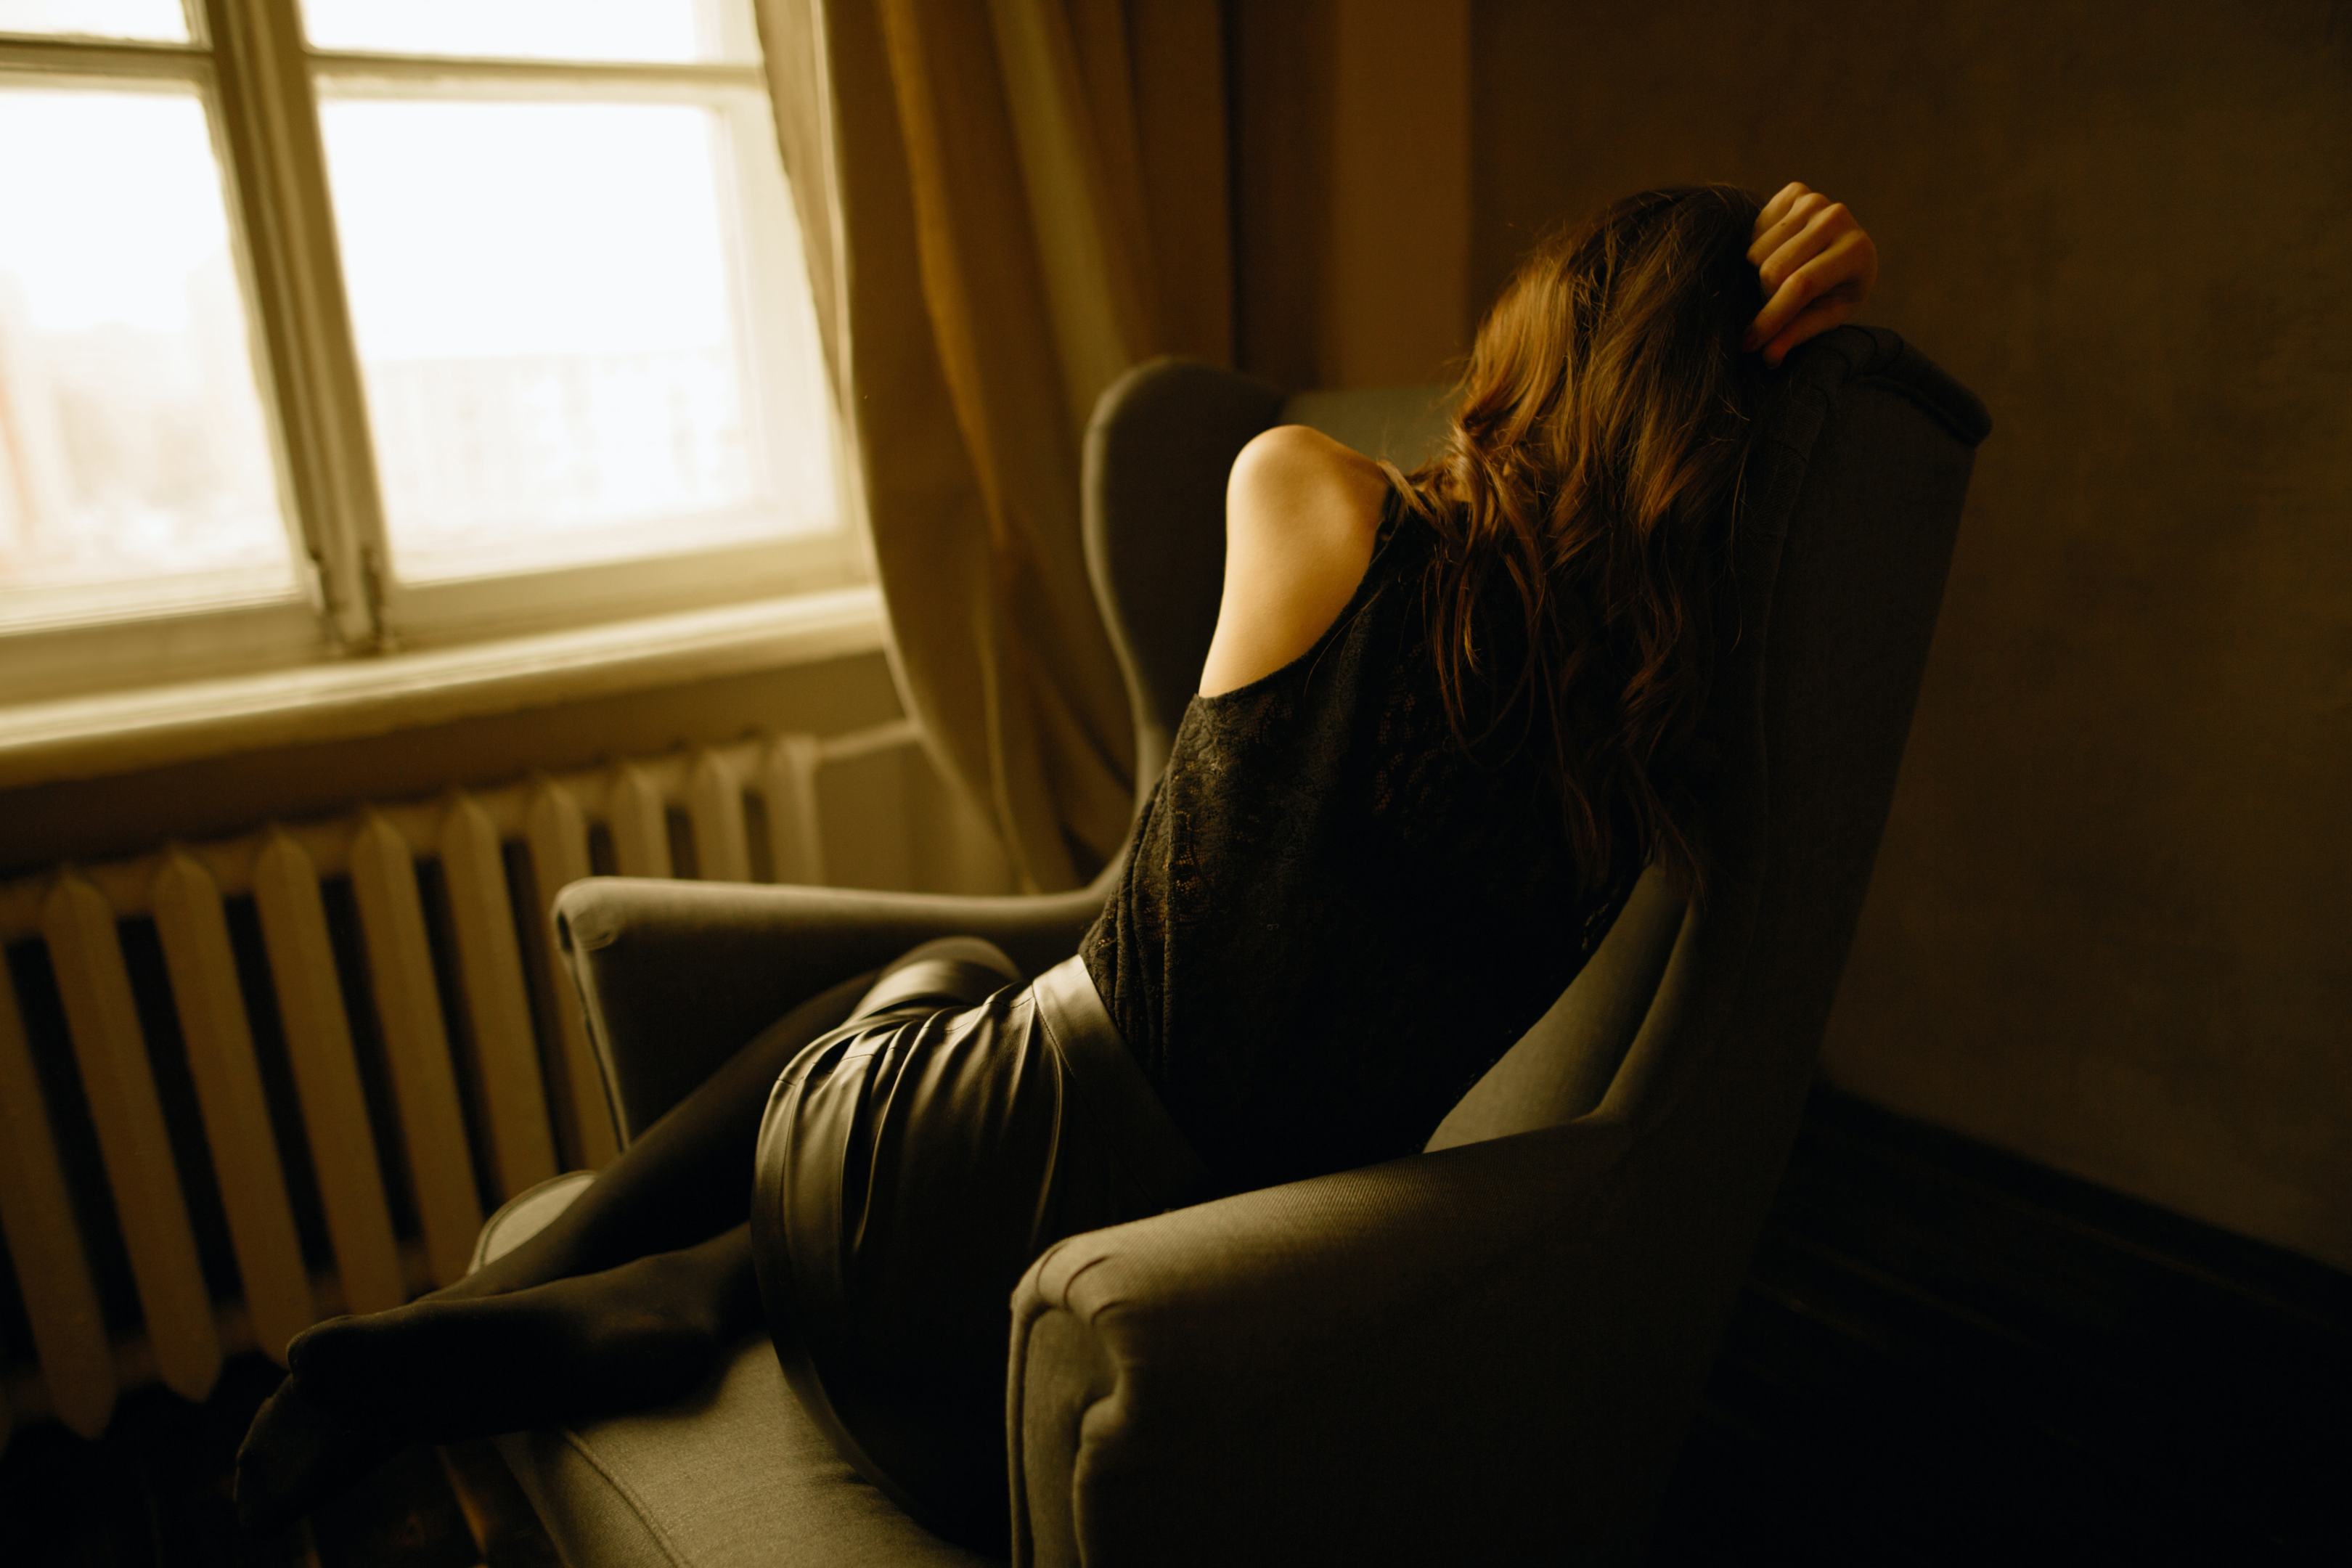 Depressed woman sitting in a chair by a window in the dark